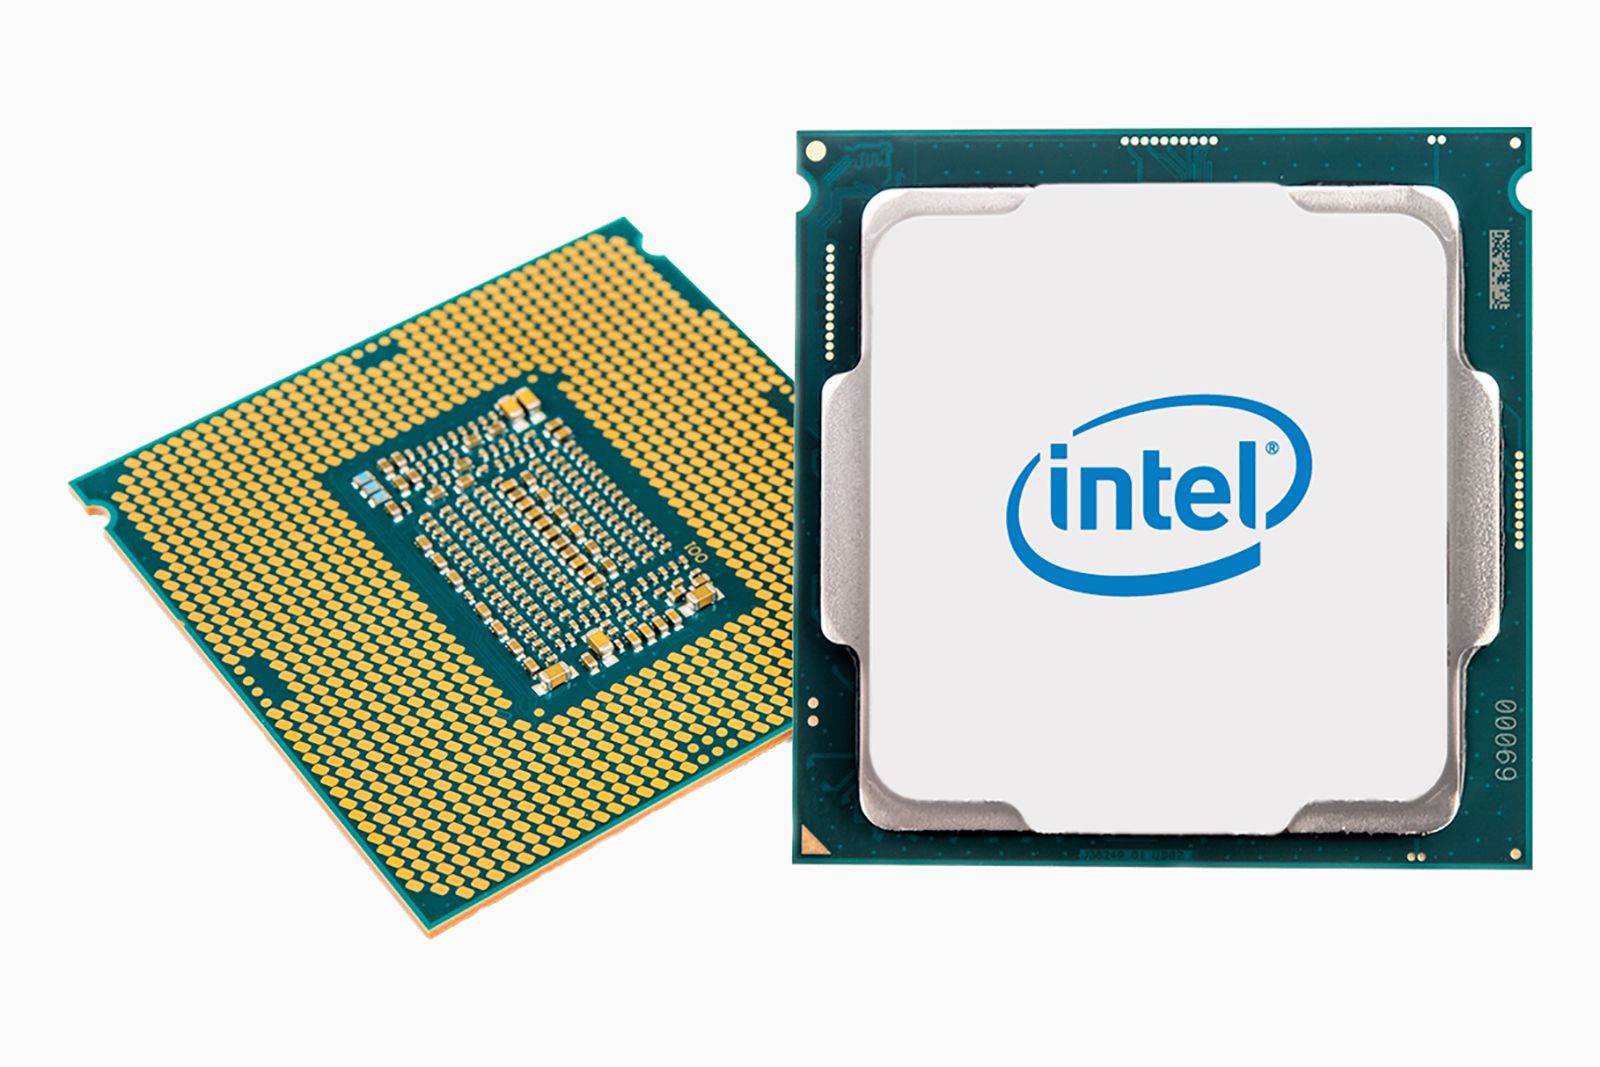 Intel i5 vs Intel i7 whats the difference image 2